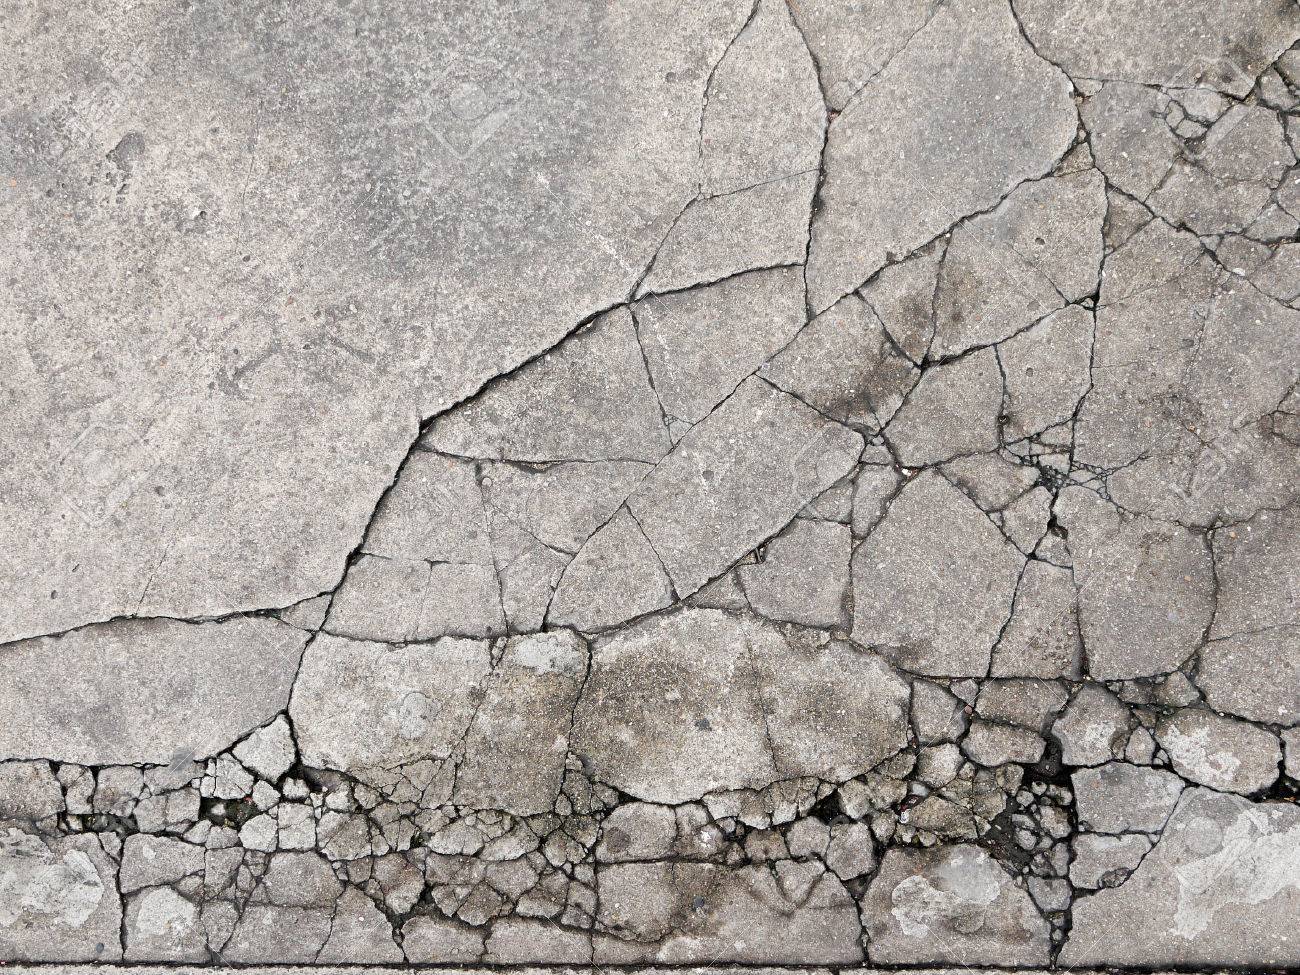 Repair cracks in a concrete driveway » MMJ Real Estate Agents - Sales,  Leasing, Management, Strata, Advisory, Town Planning, Business